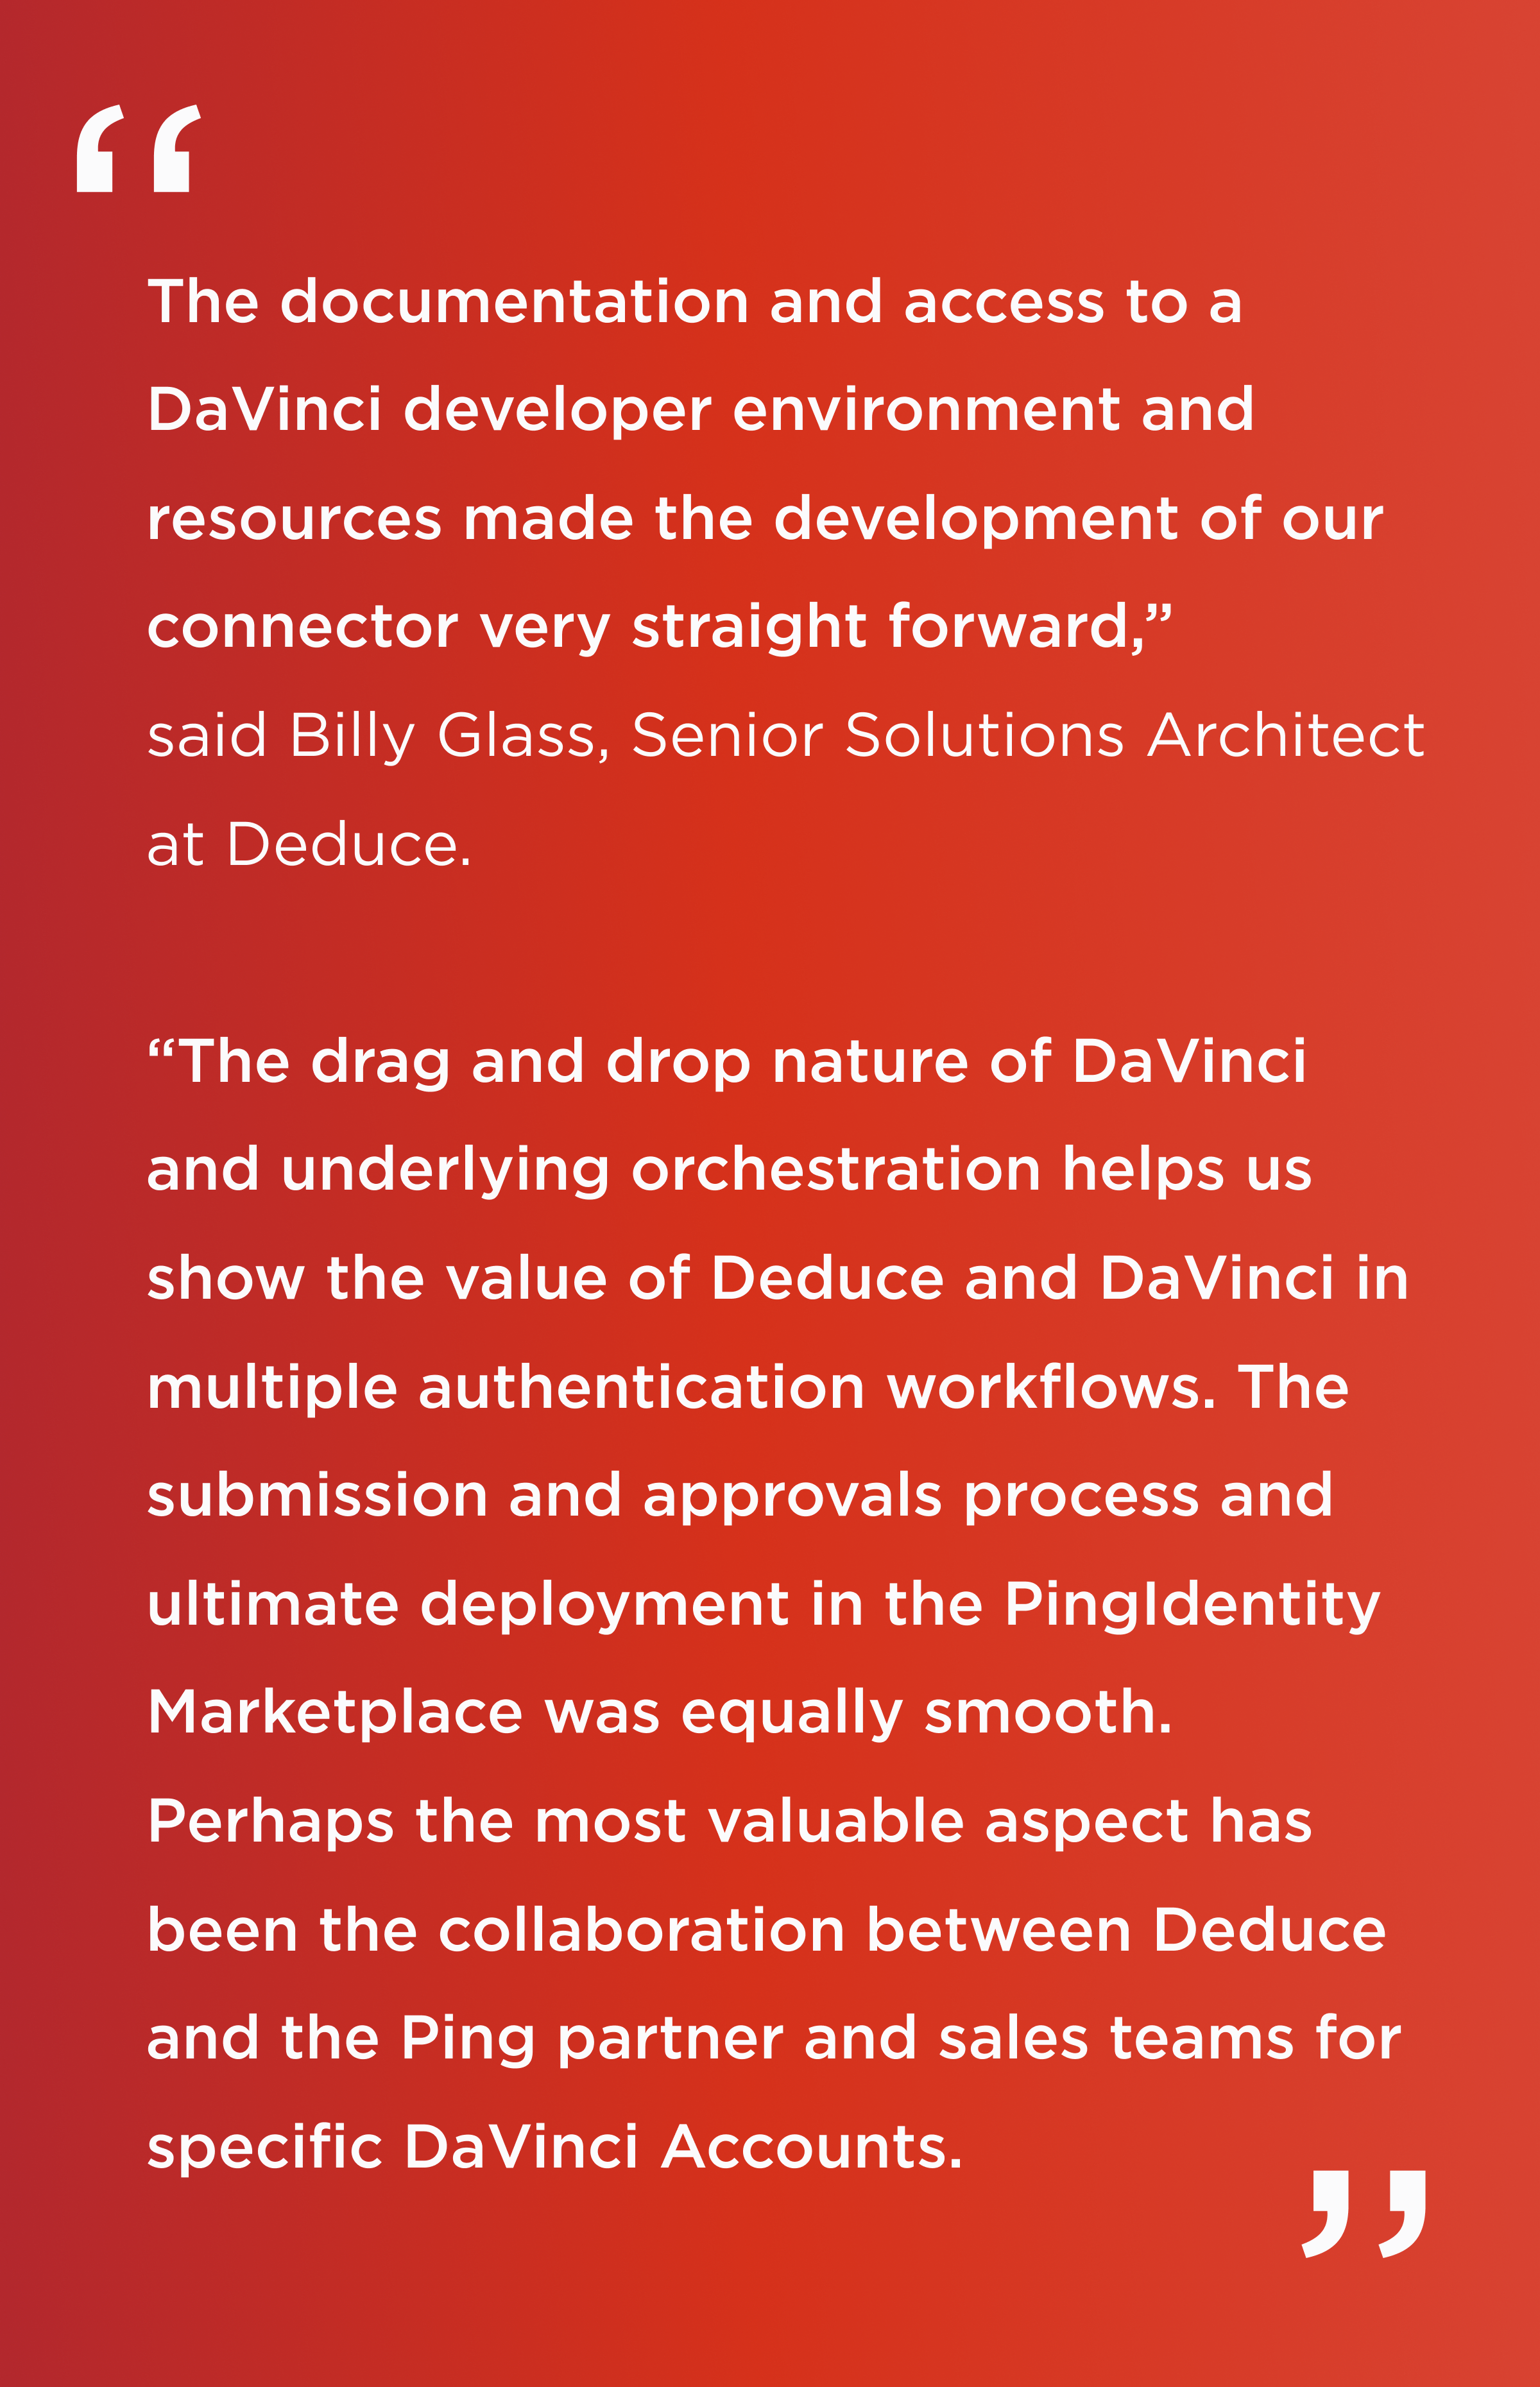 Quote. The documentation and access to a DaVinci developer environment and resources made the development of our connector very straight forward. The drag and drop nature of DaVinci and underlying orchestration helps us show the value of Deduce and DaVinci in multiple authentication workflows. The submission and approvals process and ultimate deployment in the PingIdentity Marketplace was equally smooth. Perhaps the most valuable aspect has been the collaboration between Deduce and the Ping partner and sales teams for specific DaVinci accounts. End quote. Billy Glass, Senior Solutions Architect at Deduce